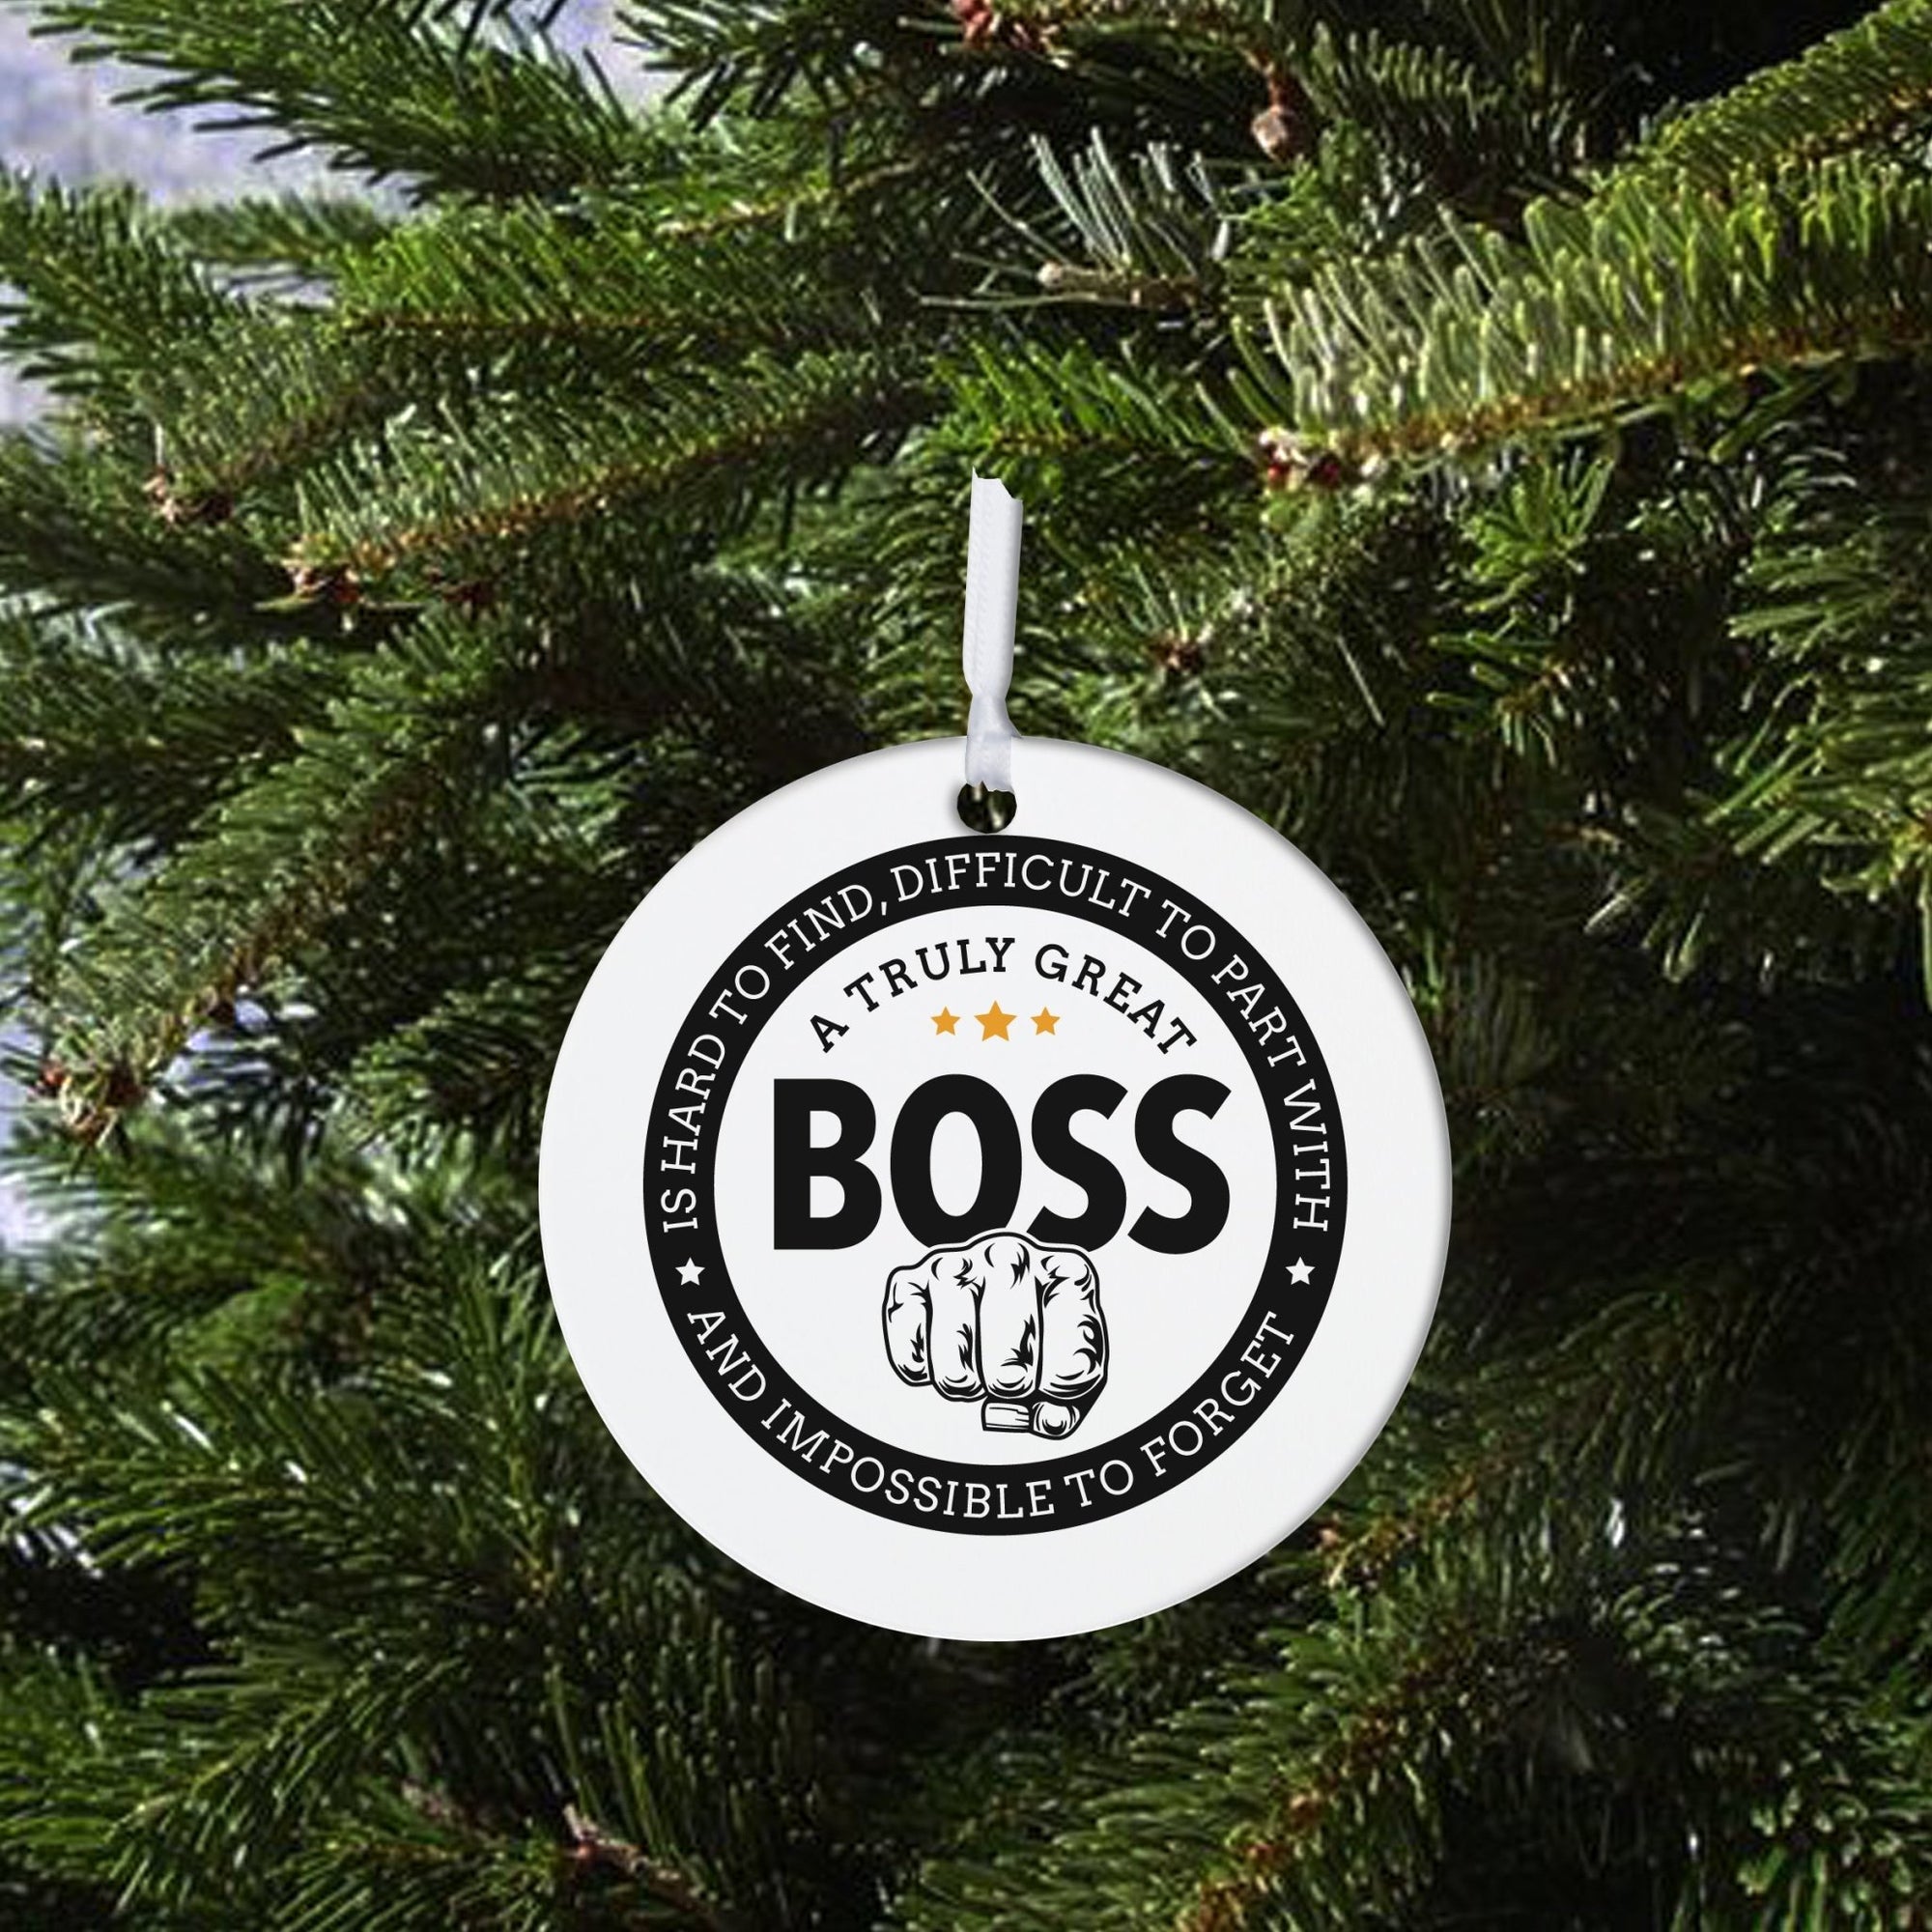 Boss / Leader White Ornament With Inspirational Message Gift Ideas - A truly Great Boss - LifeSong Milestones